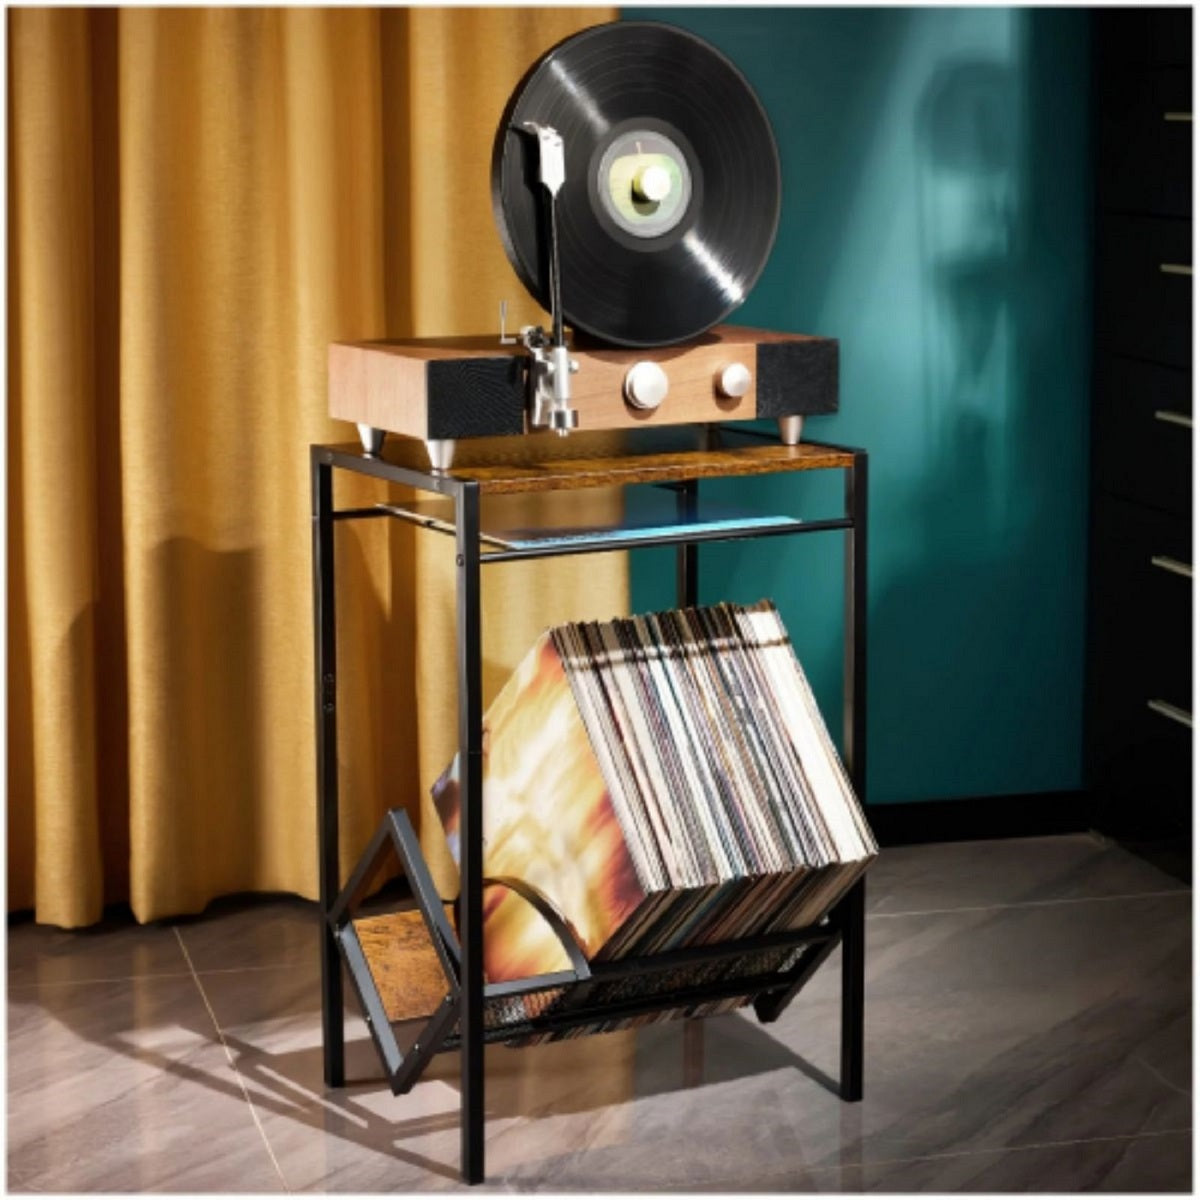 Smuxee Retro Record Player Stand